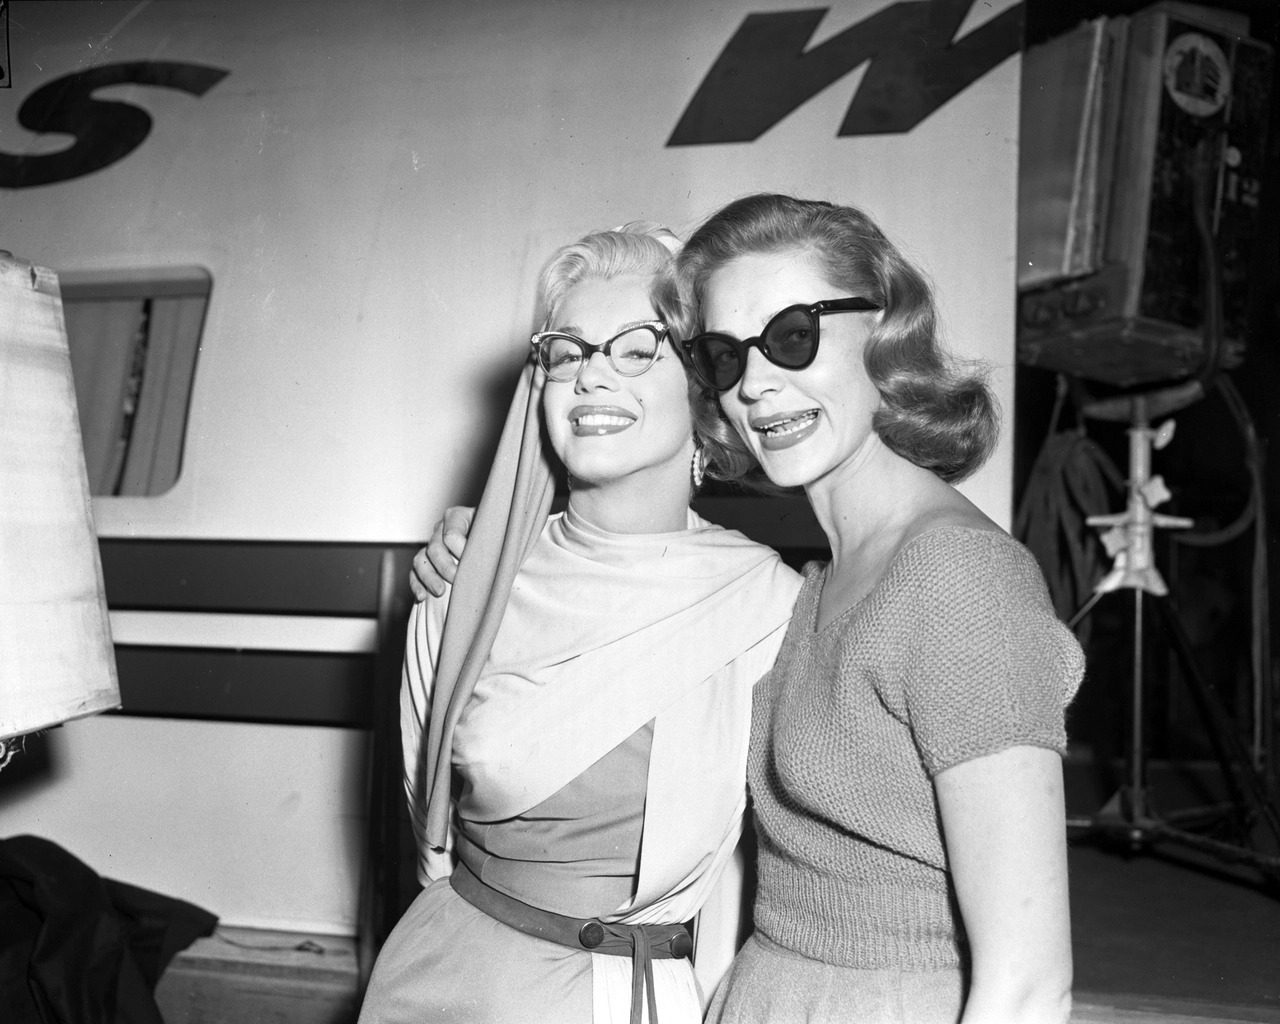 Marilyn Monroe and Lauren Bacall during a break from filming on the set of “How to Marry a Millionaire”, 1953